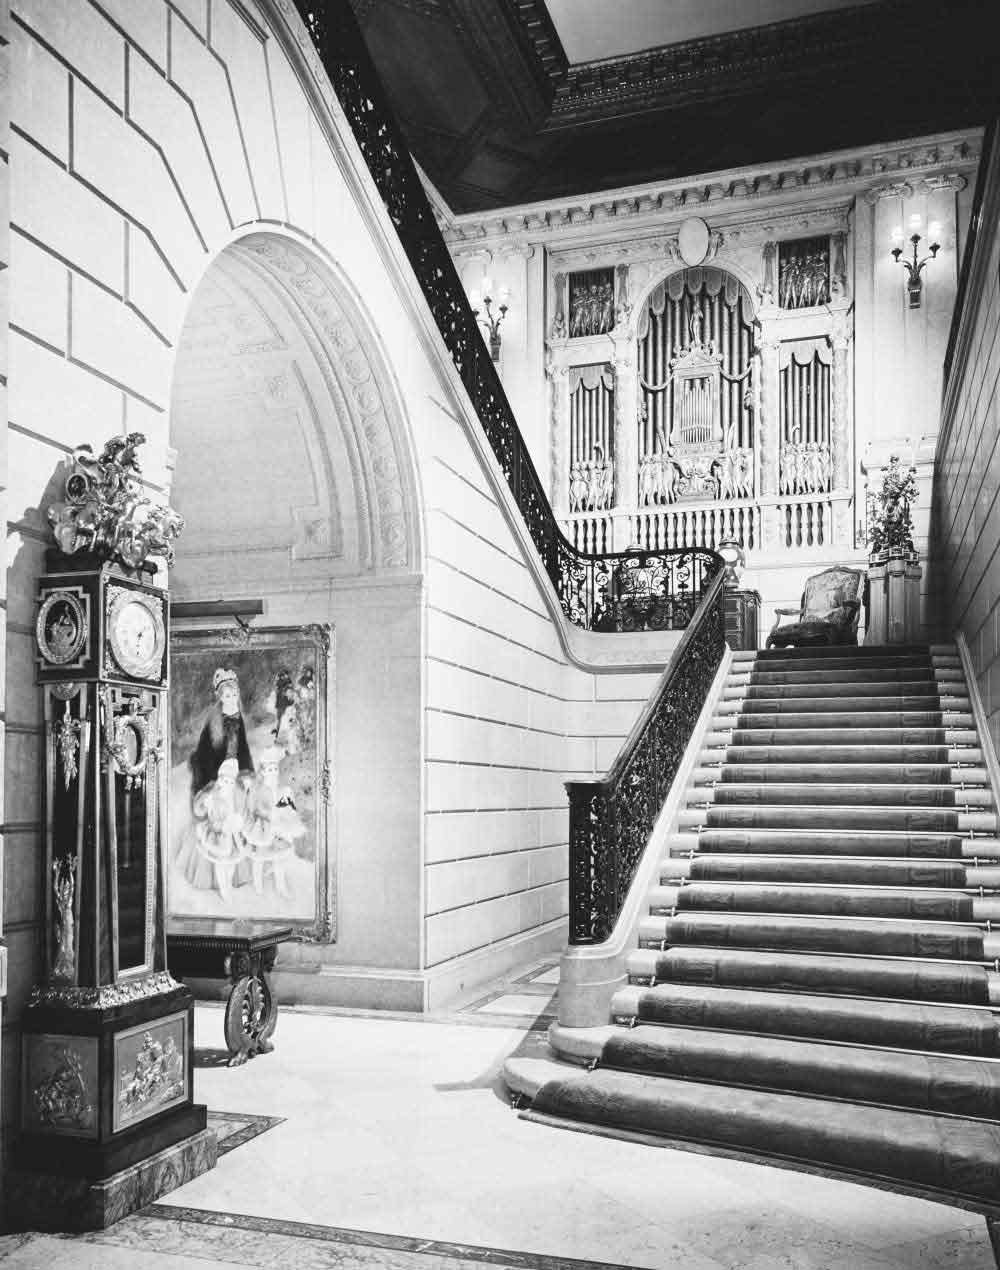 Carpeted staircase at The Frick Collection with ornate organ screen at the top